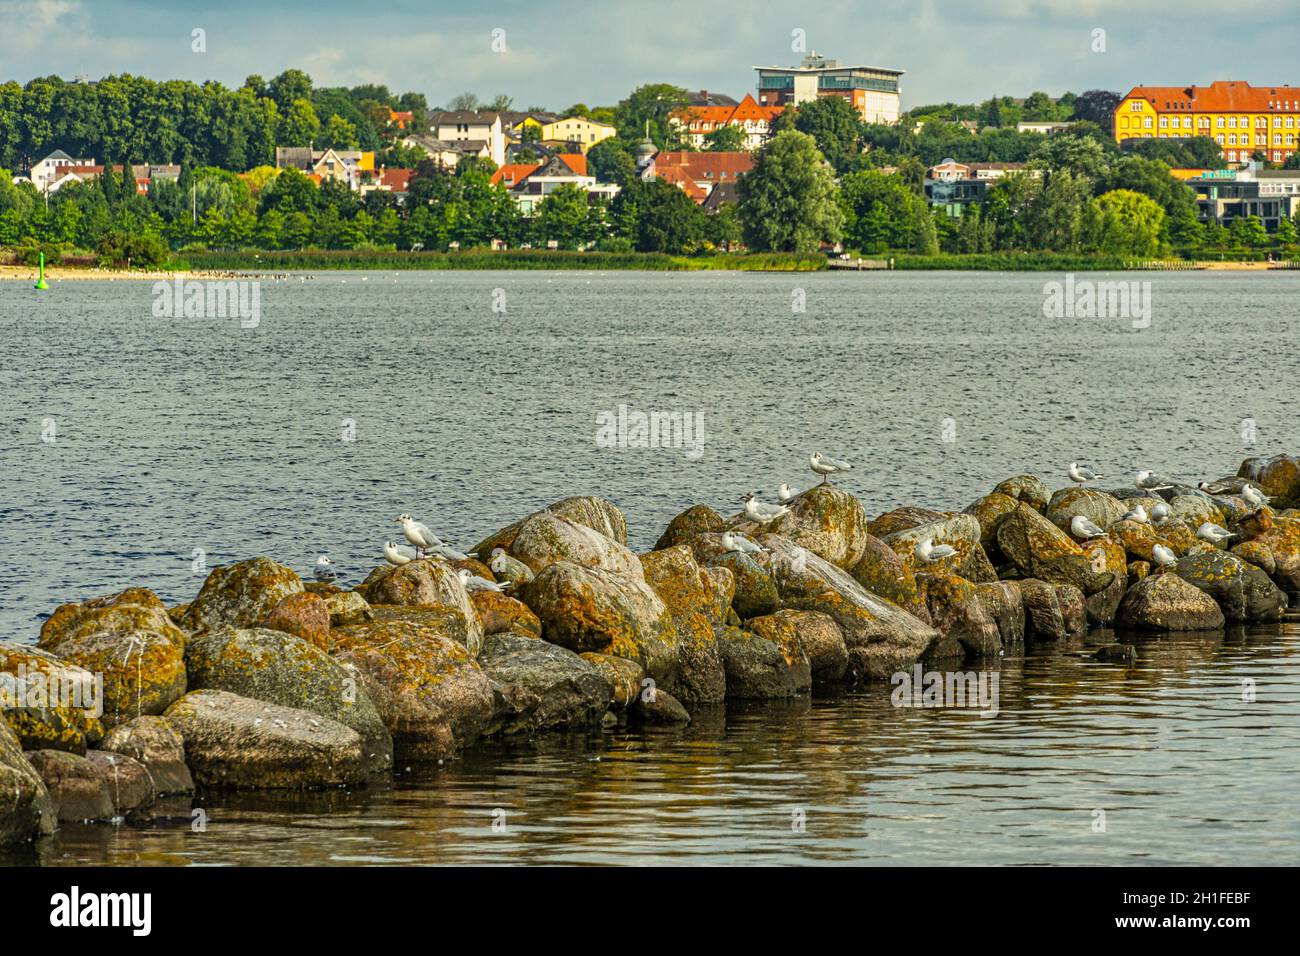 Rocks and seagulls in the Schleswig channel in front of the Busdorf marina, Haddeby. Schleswig, Schleswig-Flensburg, Schleswig-Holstein, Germany Stock Photo